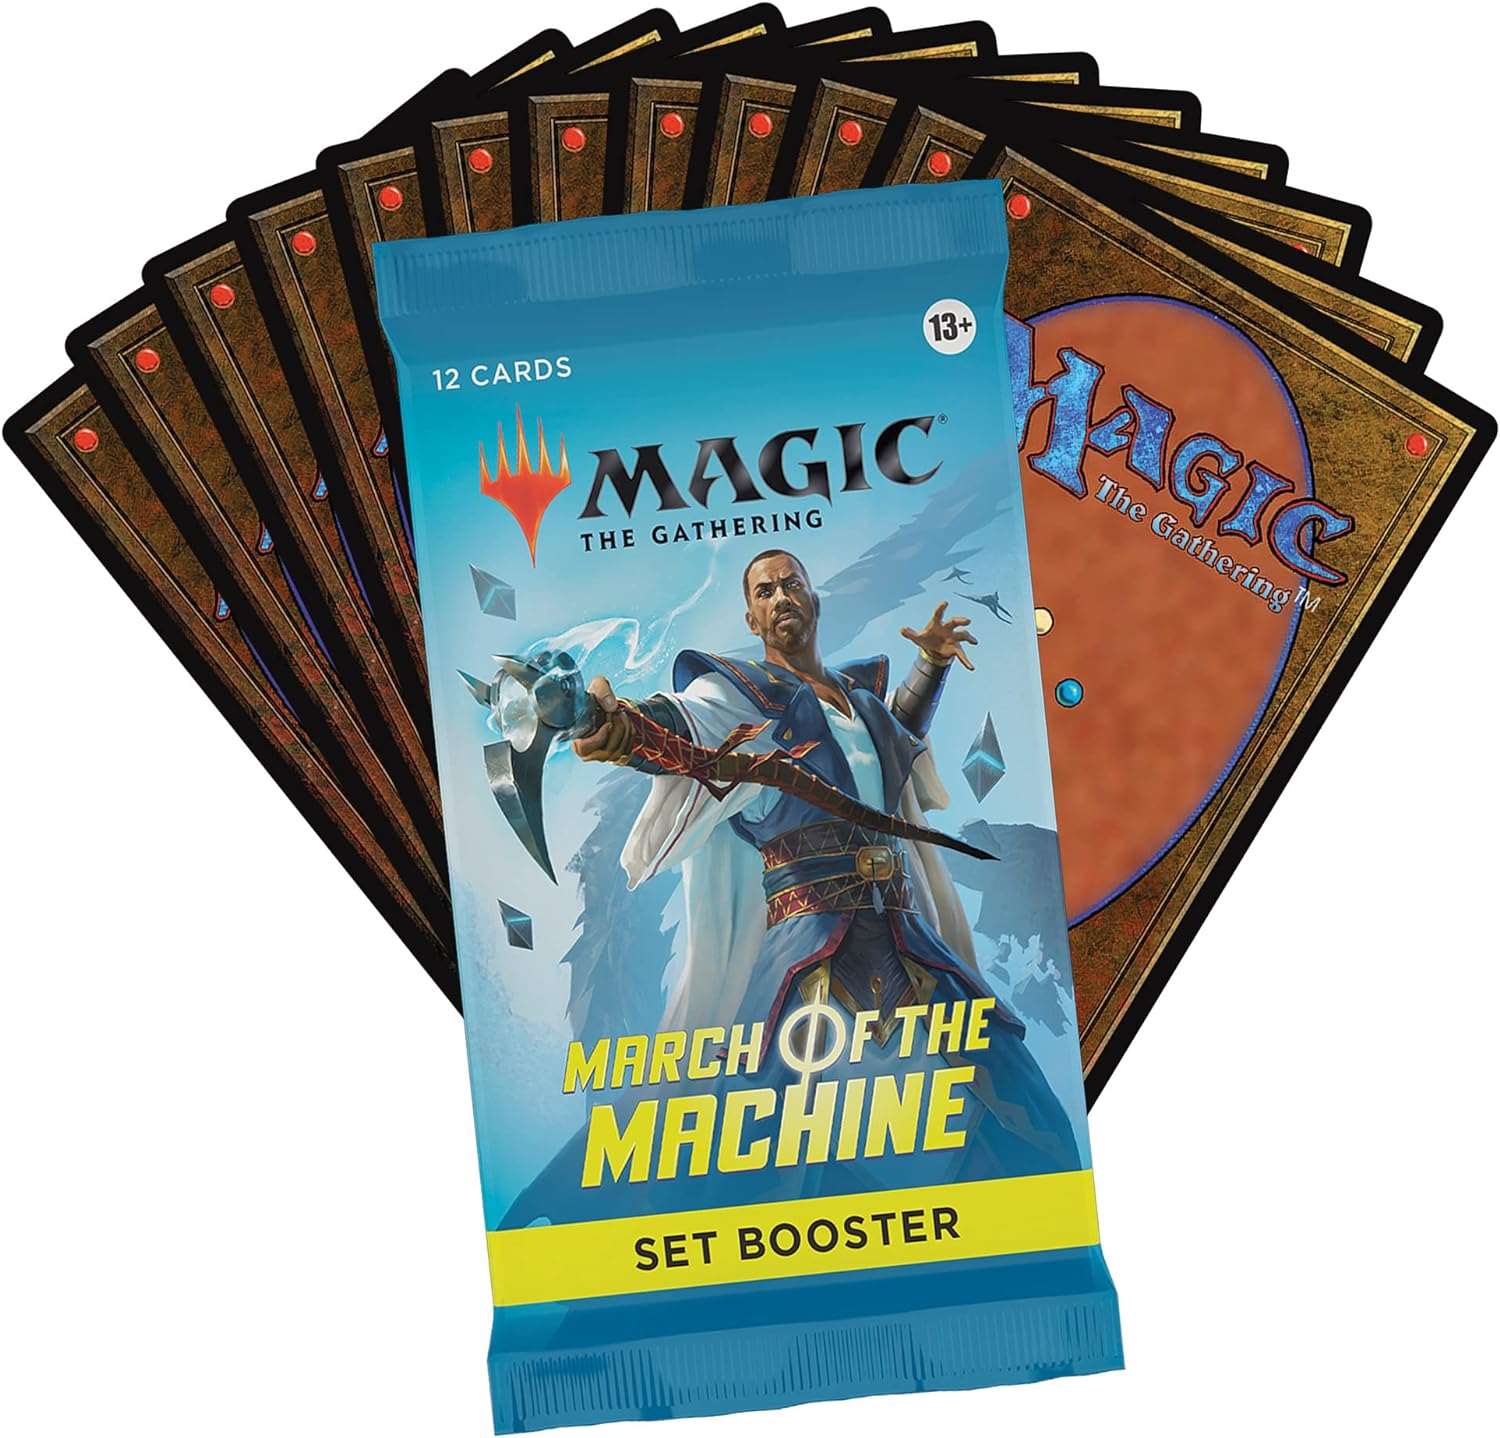 Magic: The Gathering - March of the Machine Set Booster Box - EN - CardCosmos